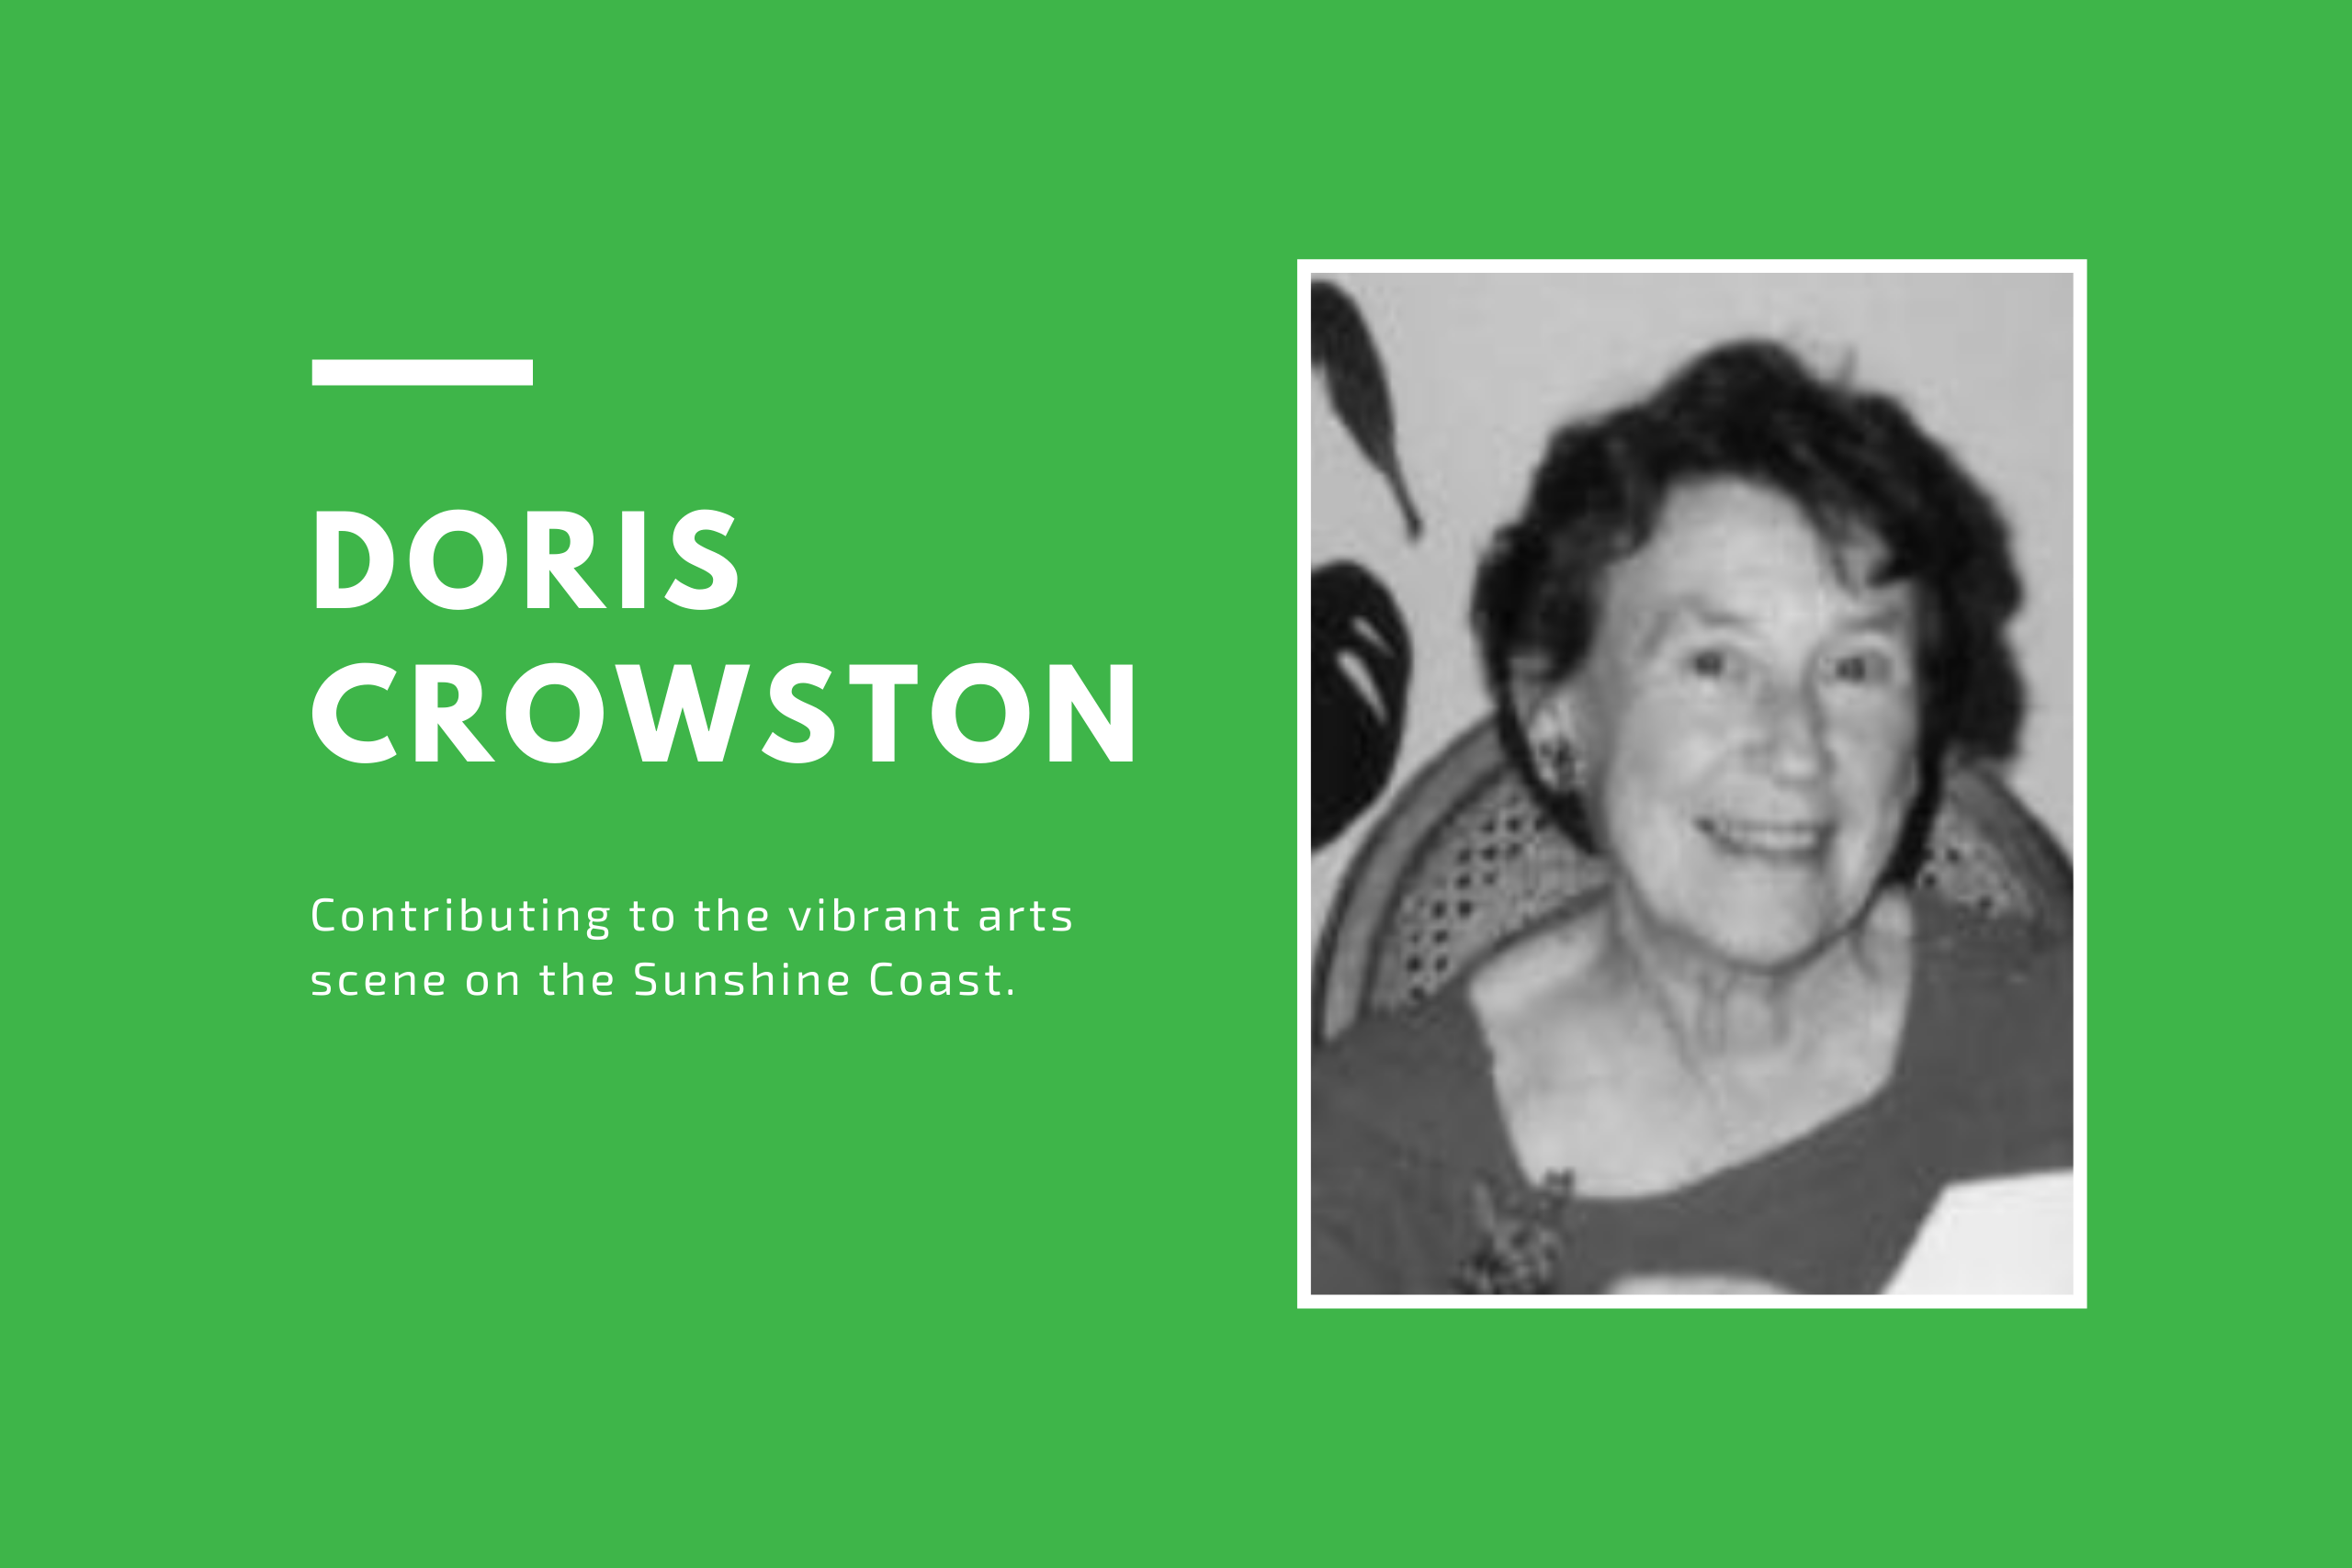 A black and white photo of Doris Crowston smiling on a green background with white text.